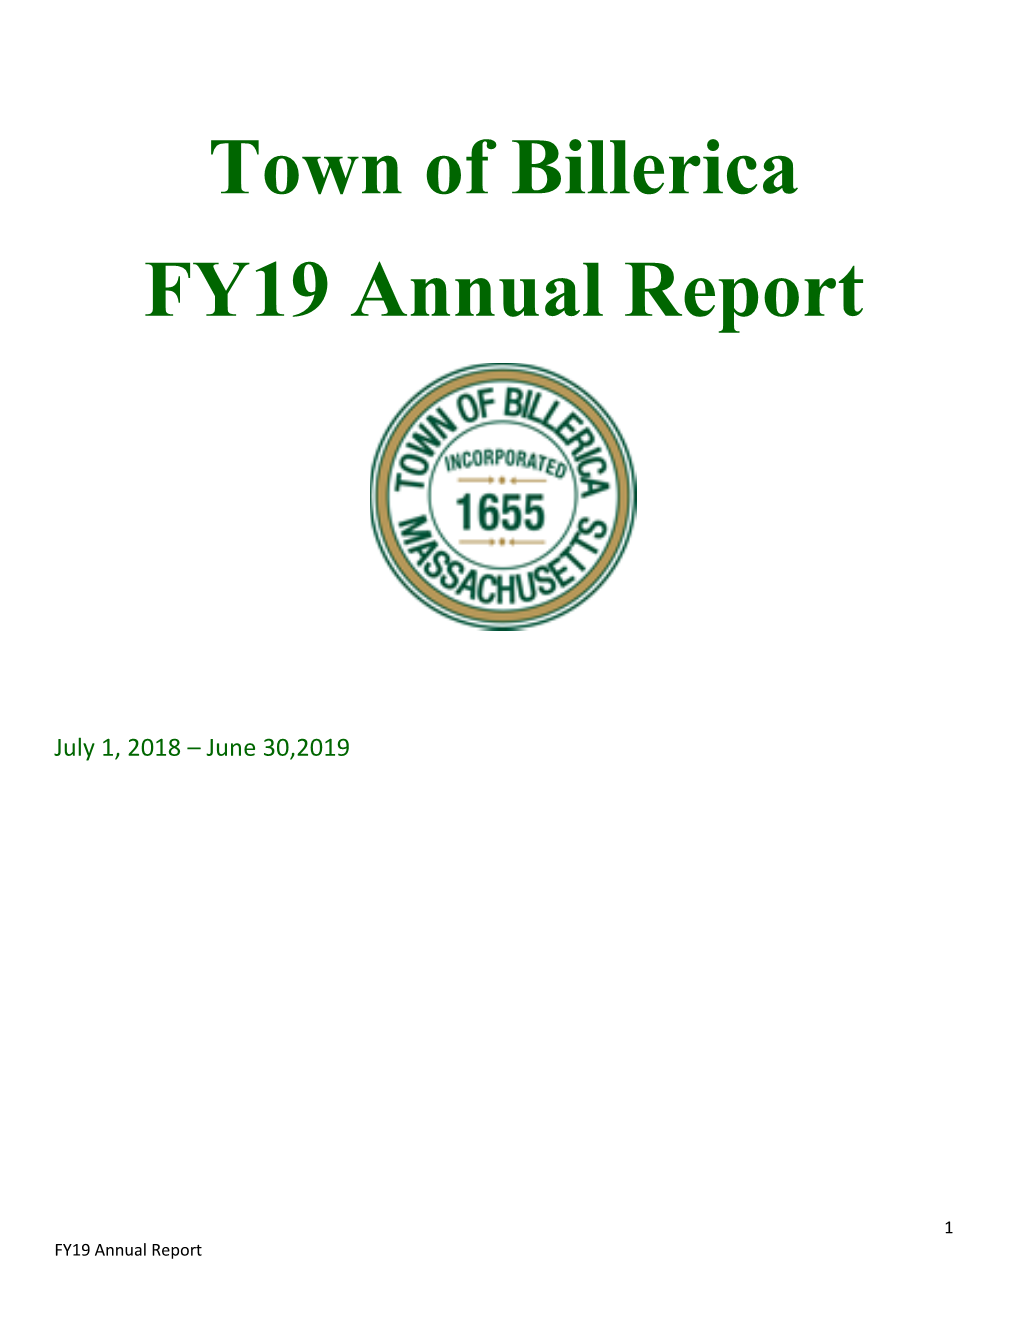 Town of Billerica FY19 Annual Report